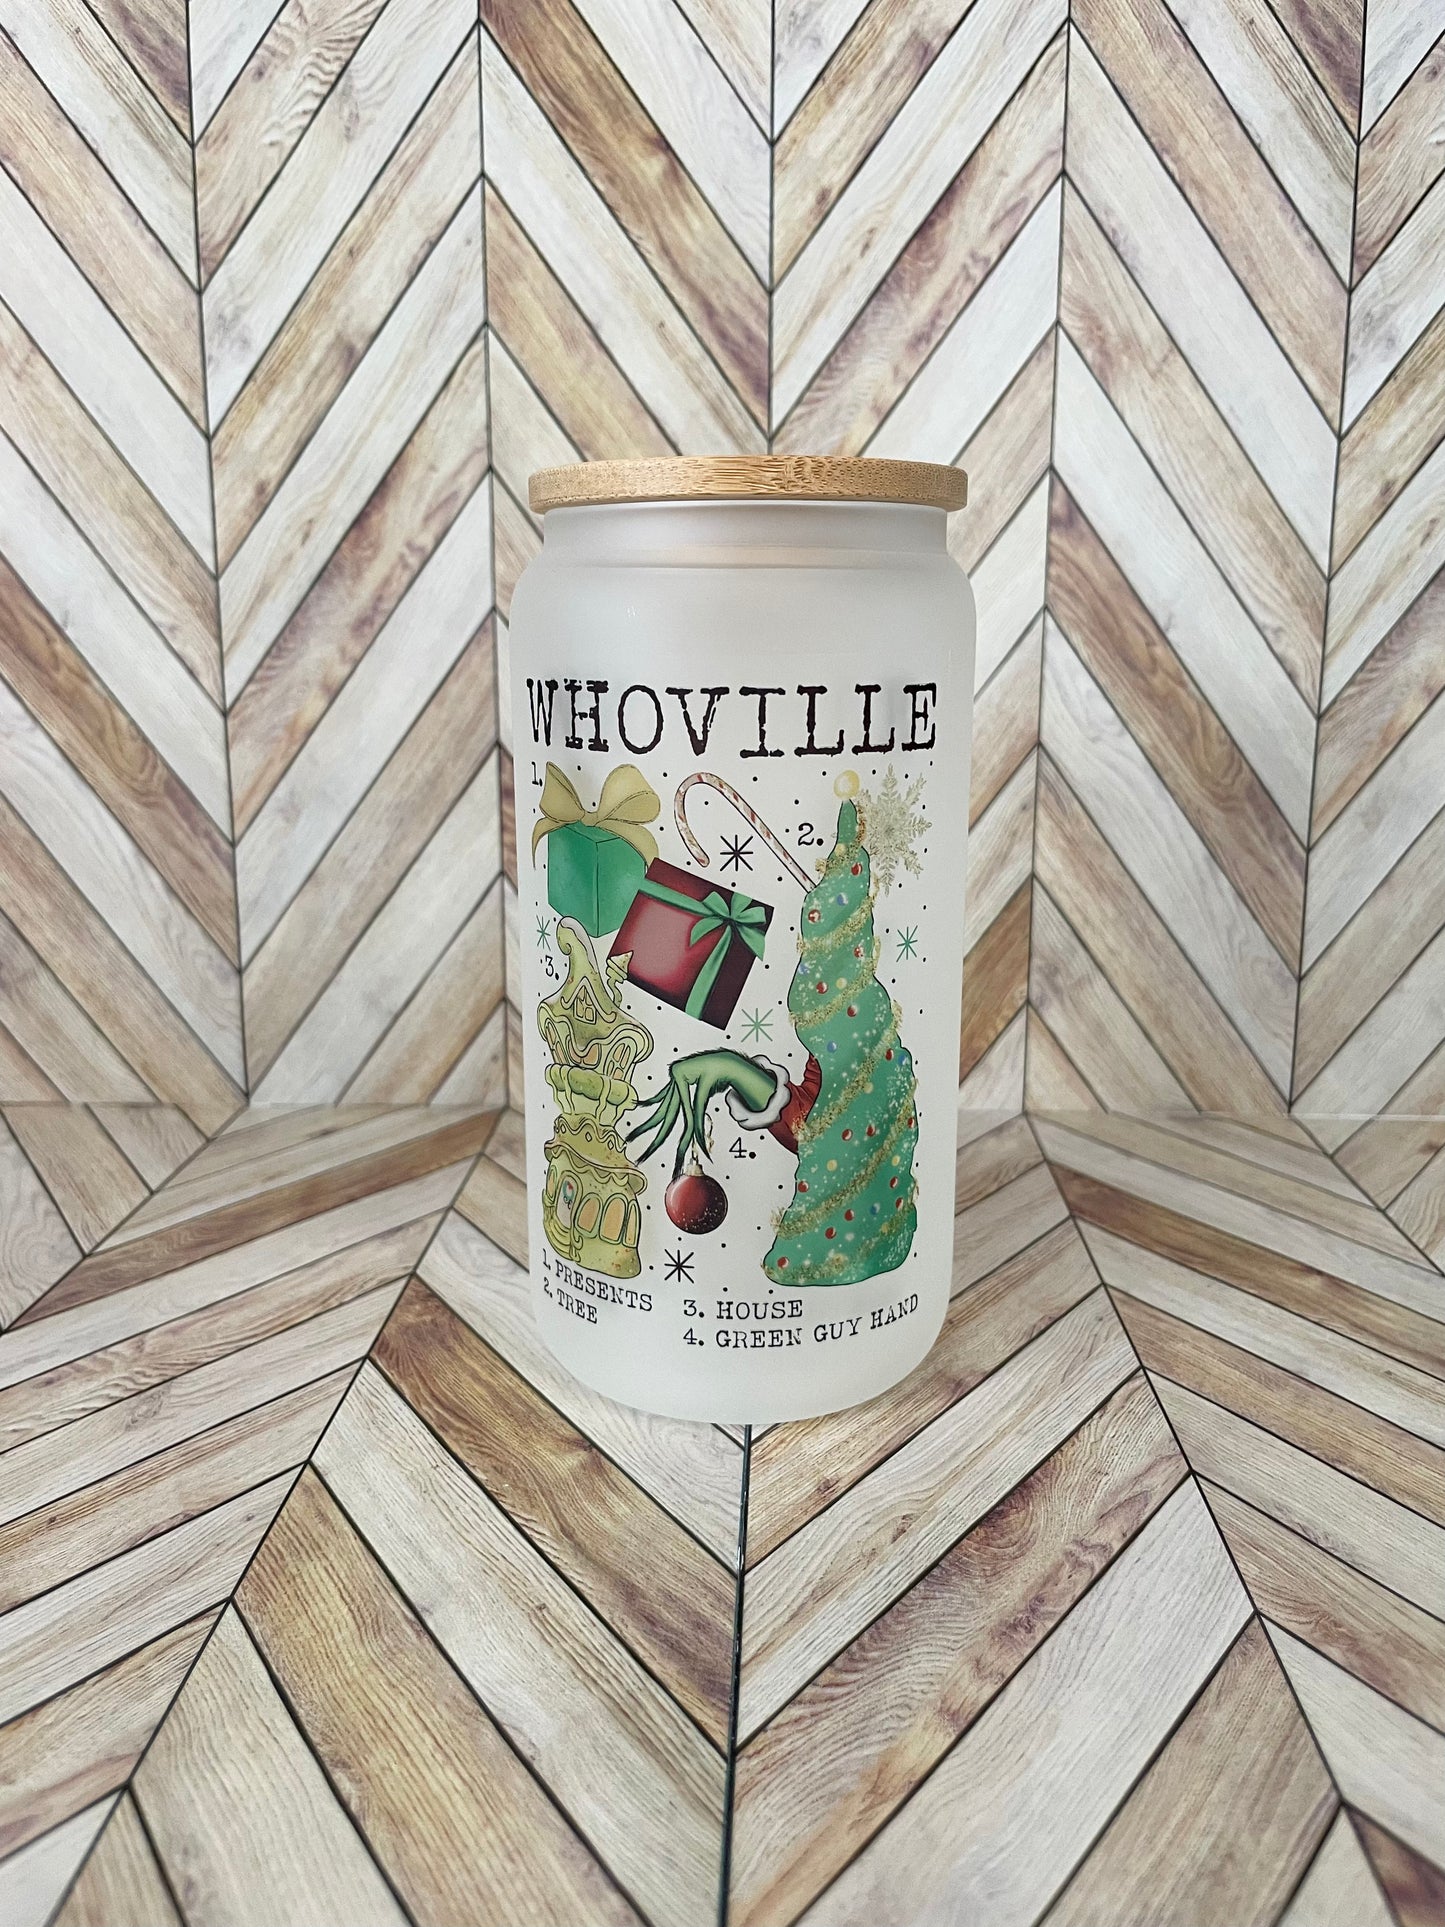 Whoville Beer Can Glass